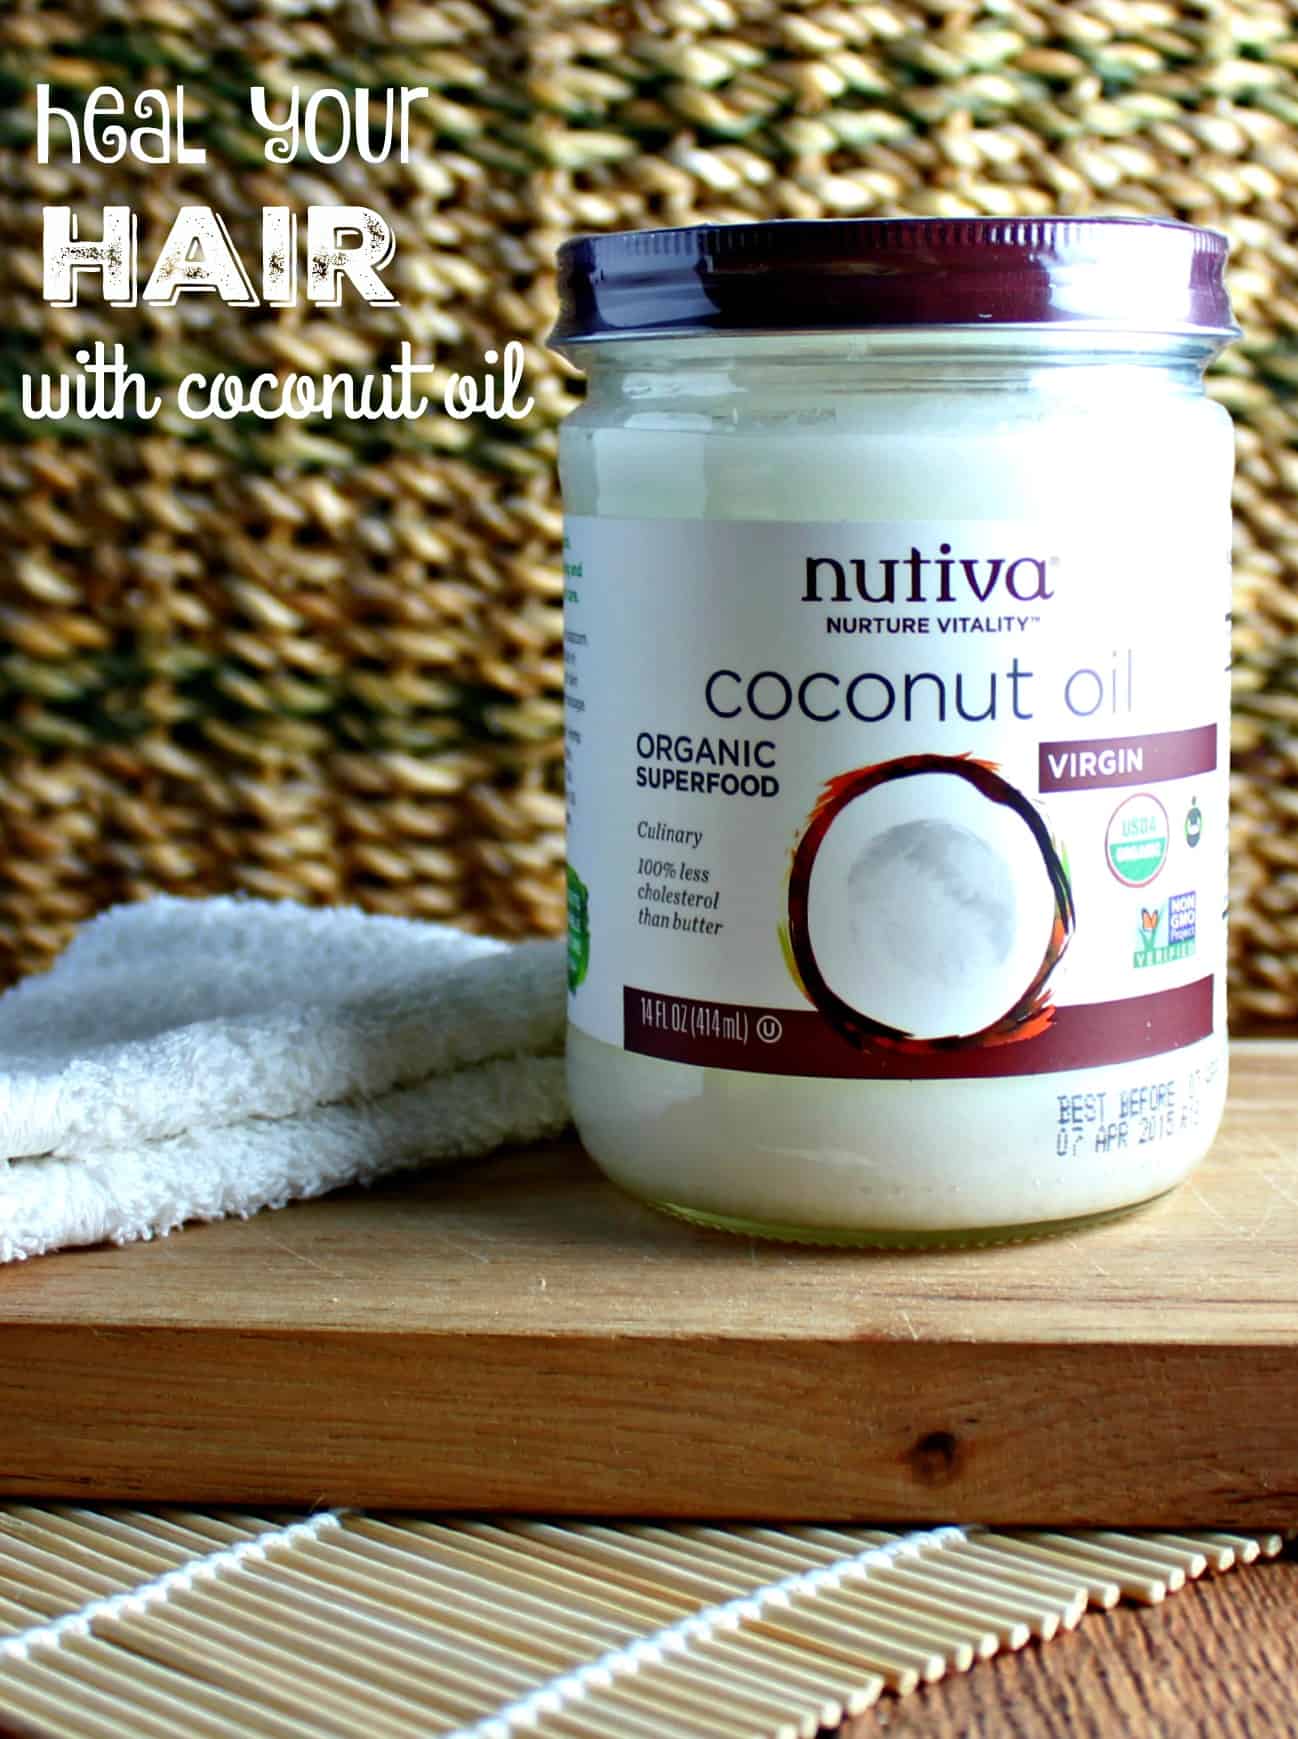 Healthy Hair With Coconut Oil